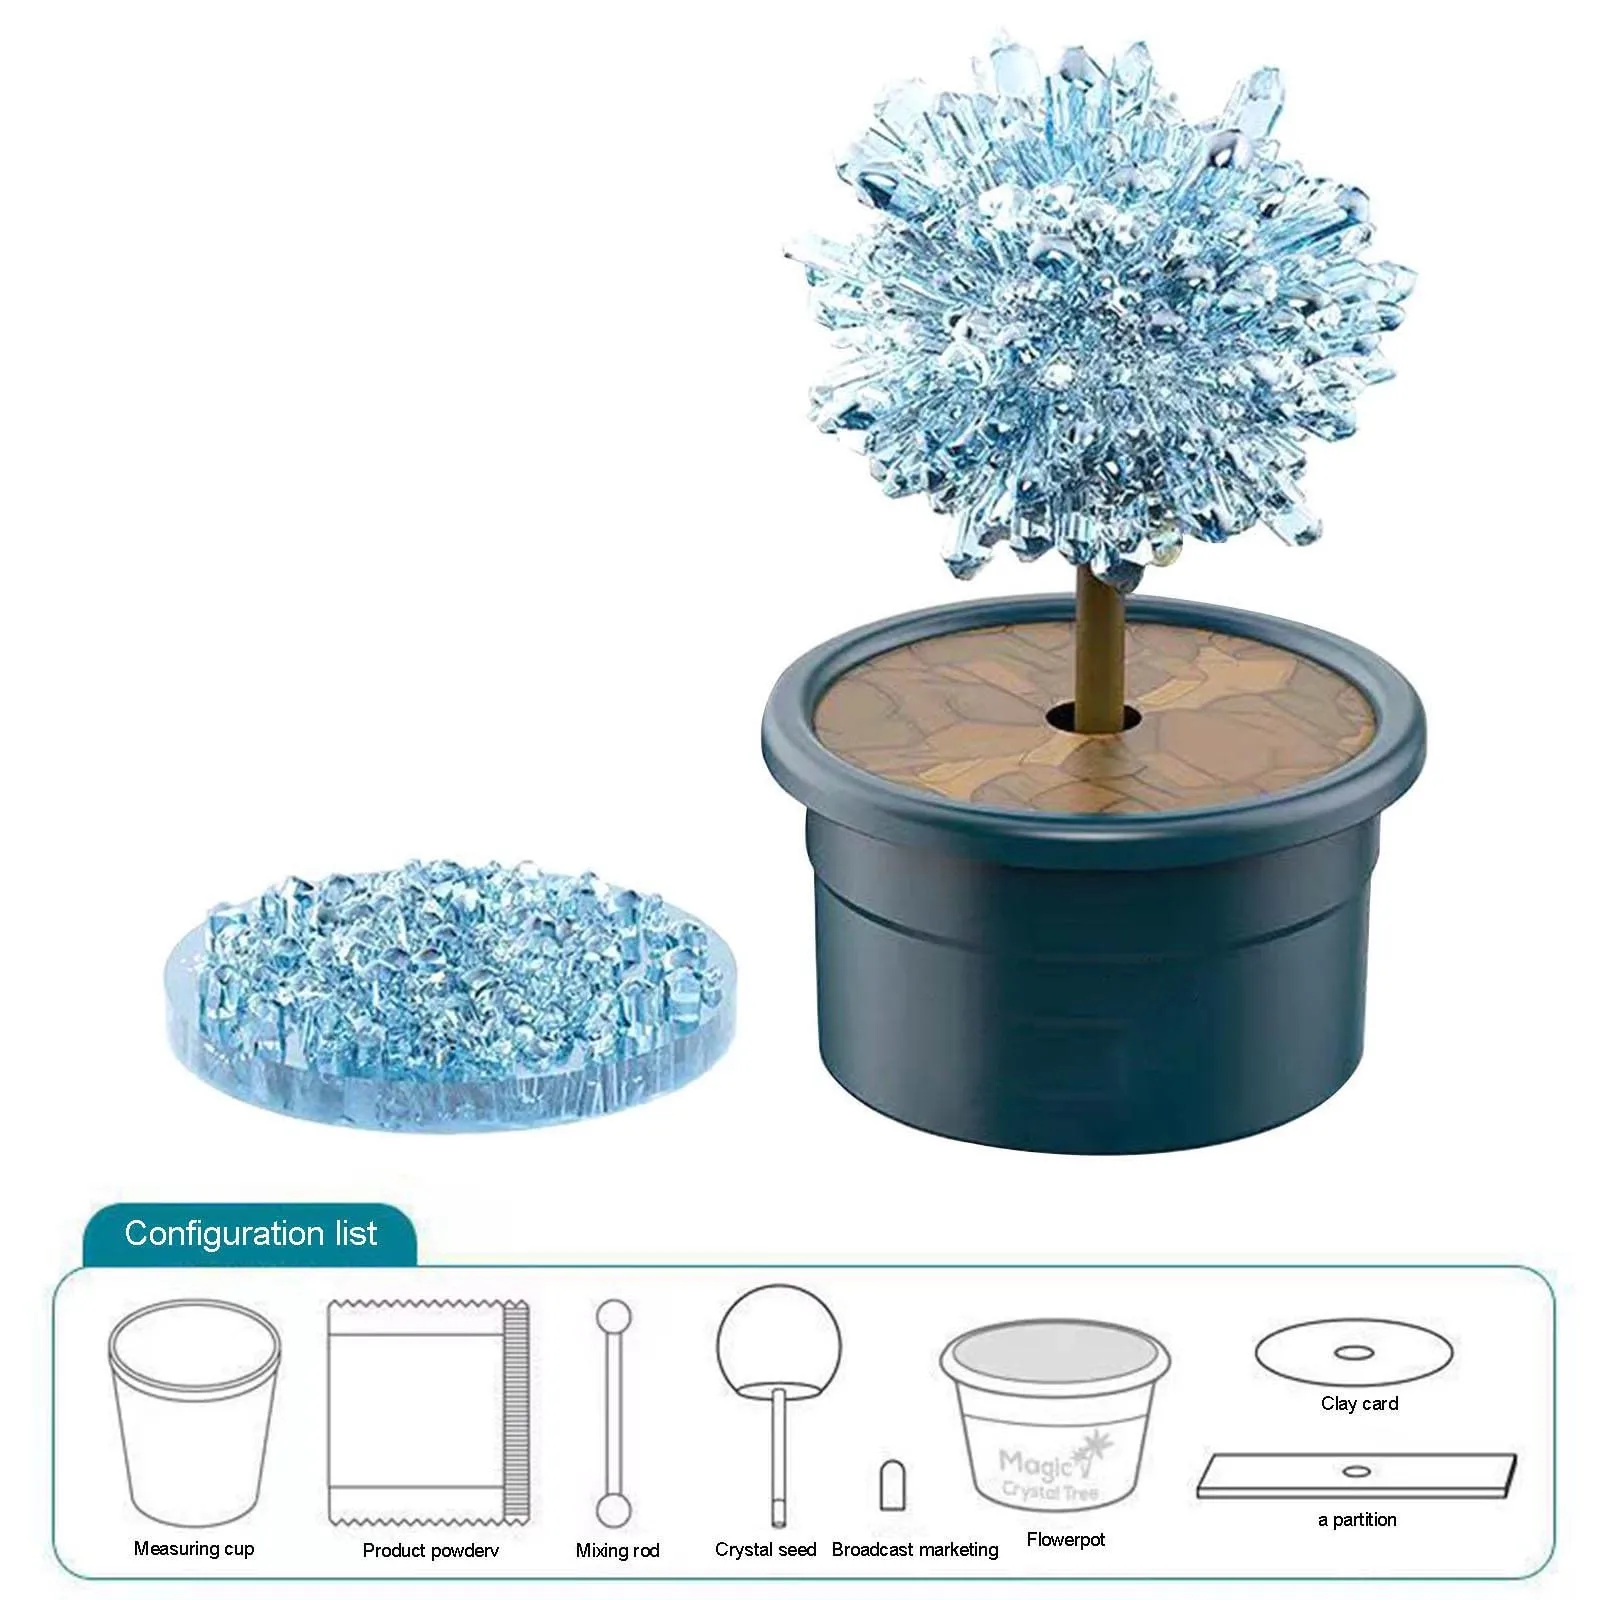 Crystal growing activities kit tree science experiments children gifts 